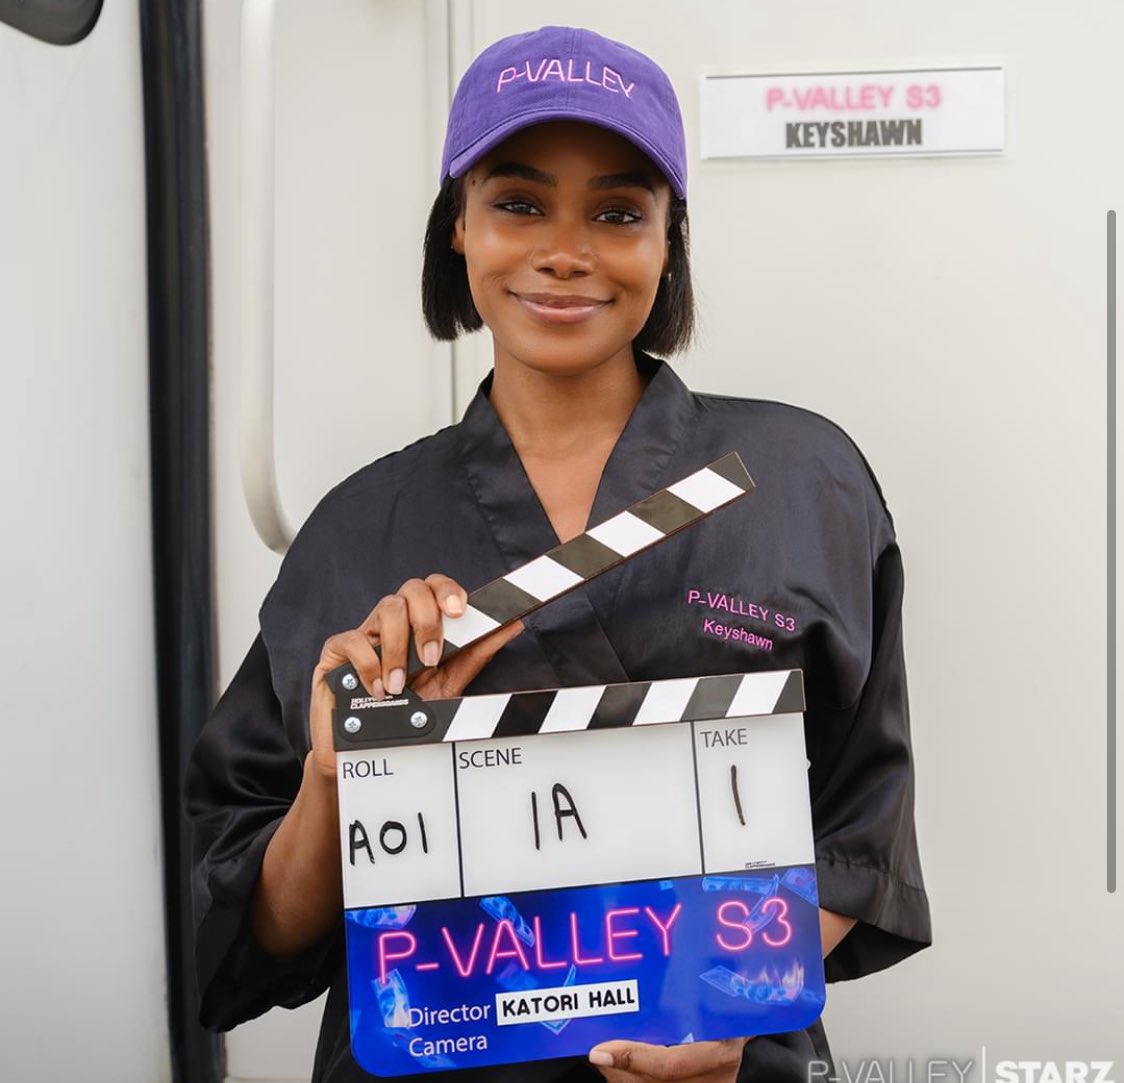 P Valley has finally started filming for season 3! #PVALLEY